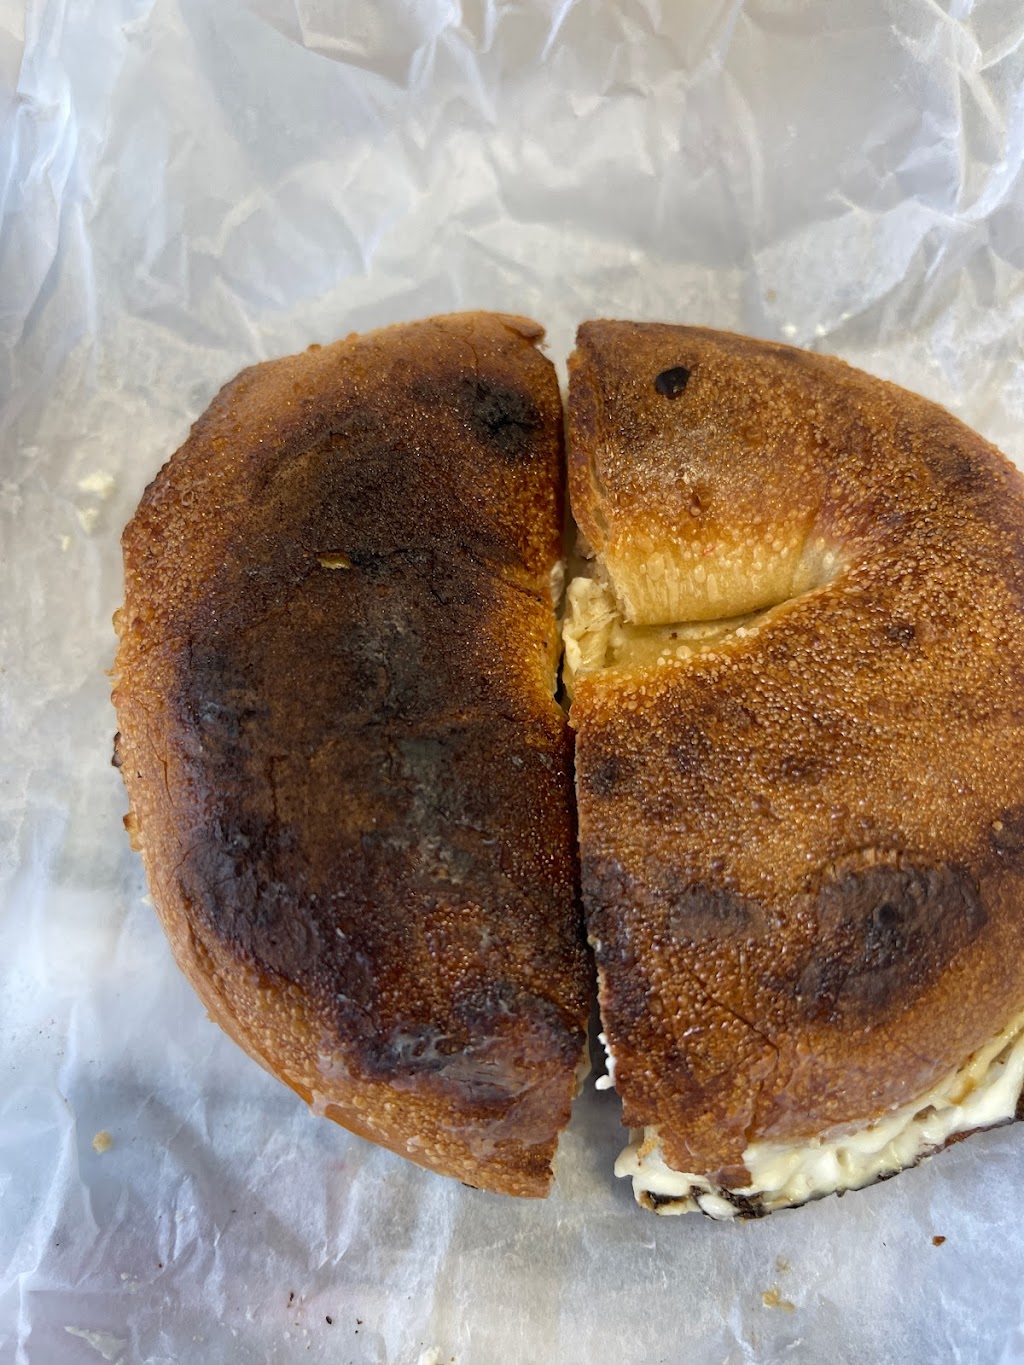 Lox of Bagels | 530 Co Rd 515, Vernon Township, NJ 07462 | Phone: (973) 764-2646